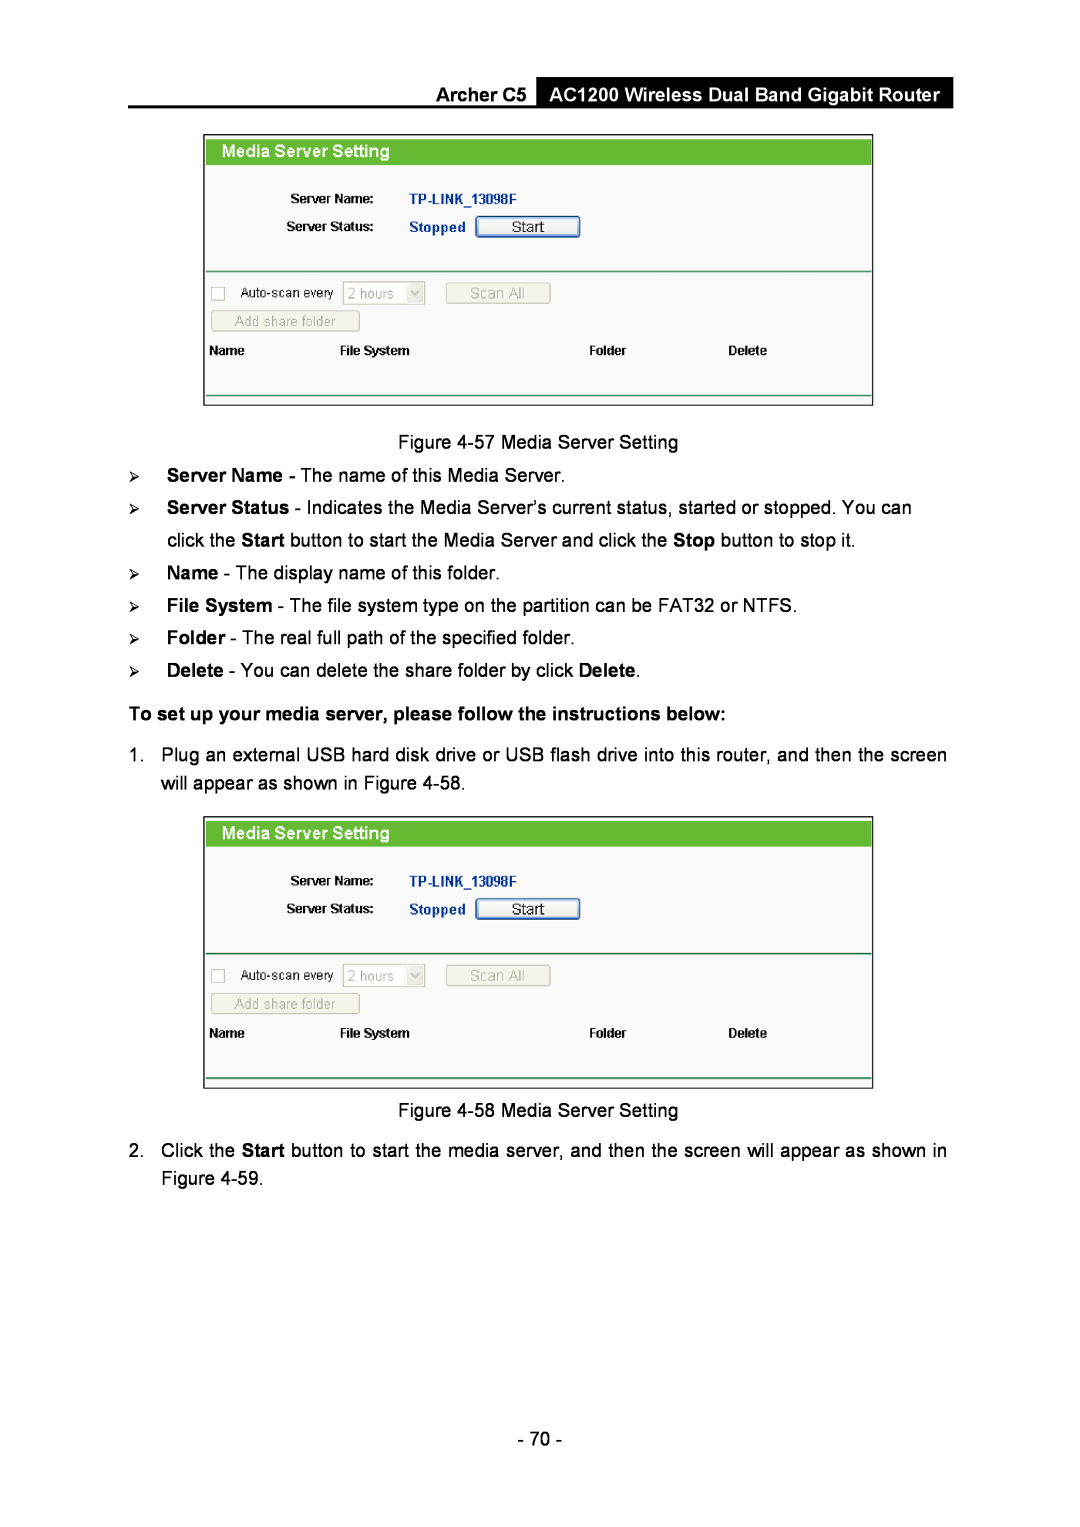 TP-Link AC1200 manual To set up your media server, please follow the instructions below 